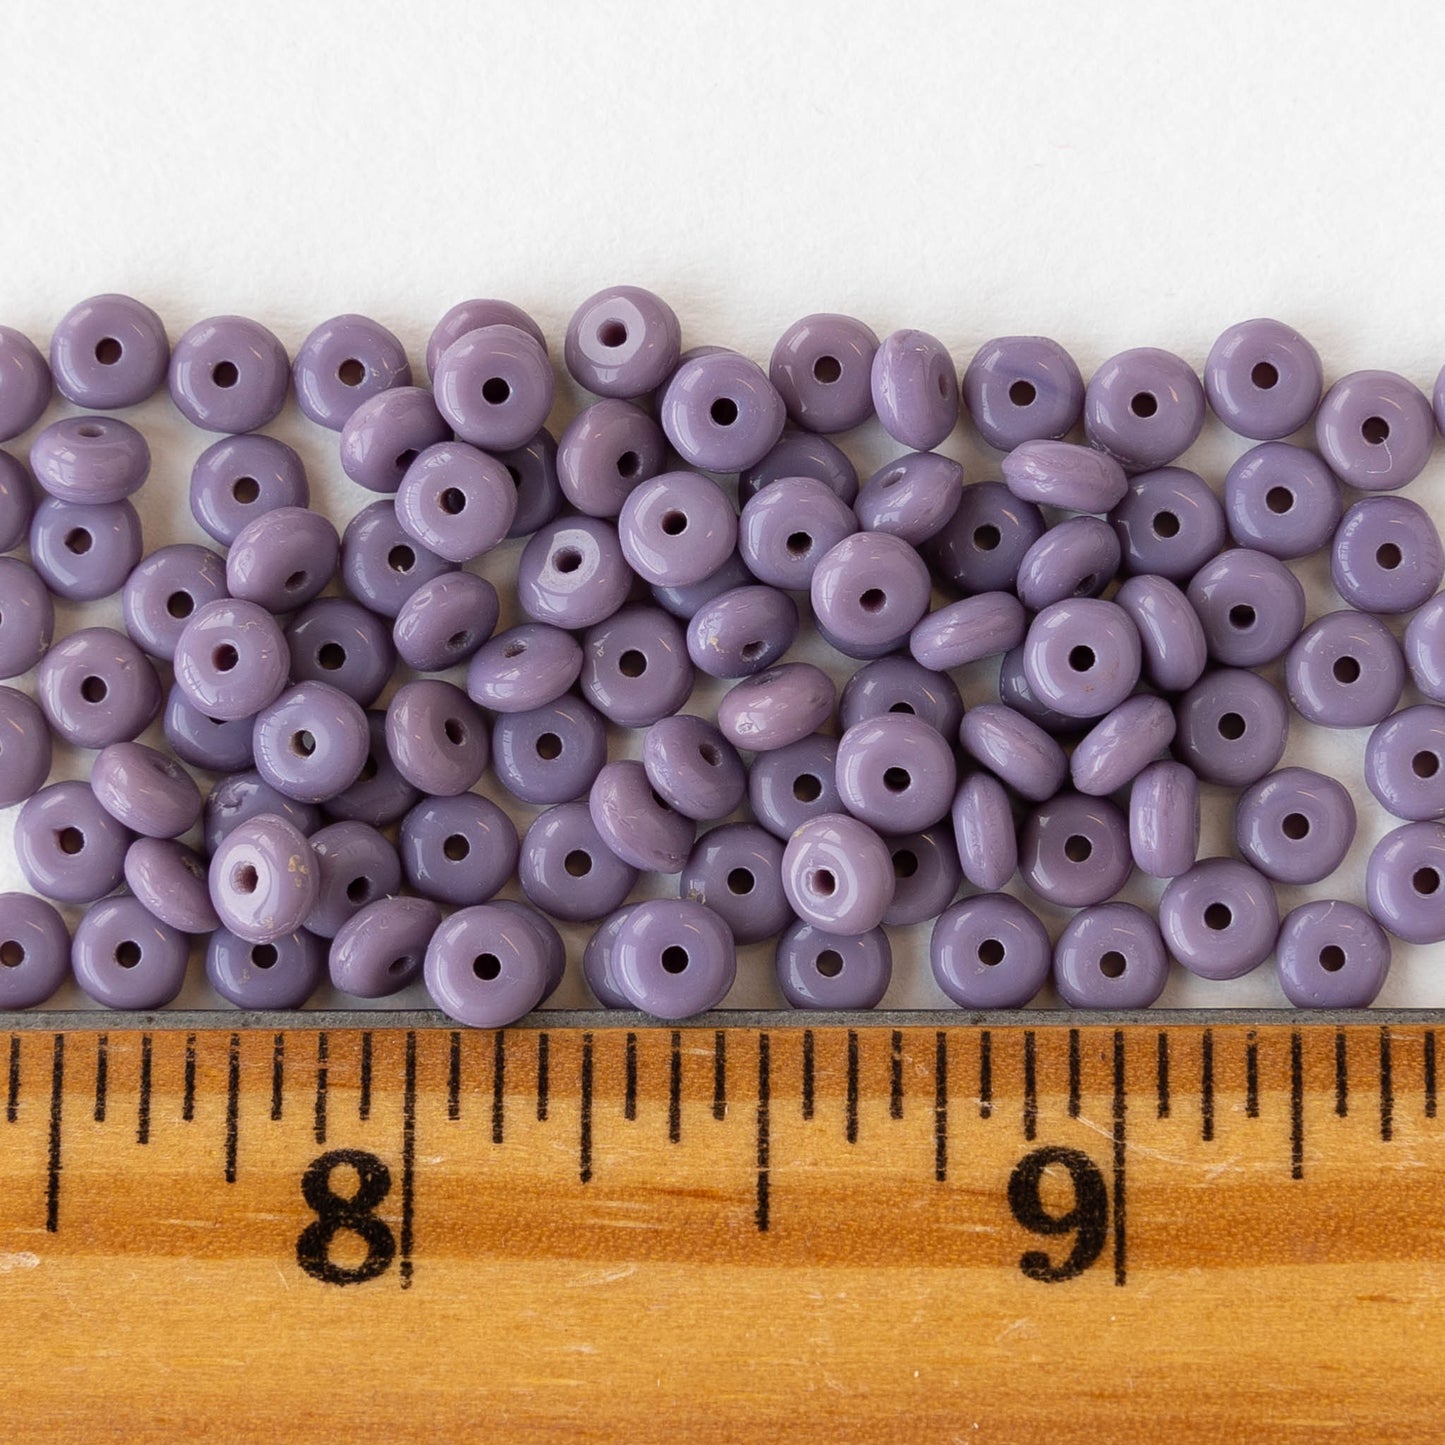 4mm Glass Rondelle Beads - Opaque Lavender - 100 Beads